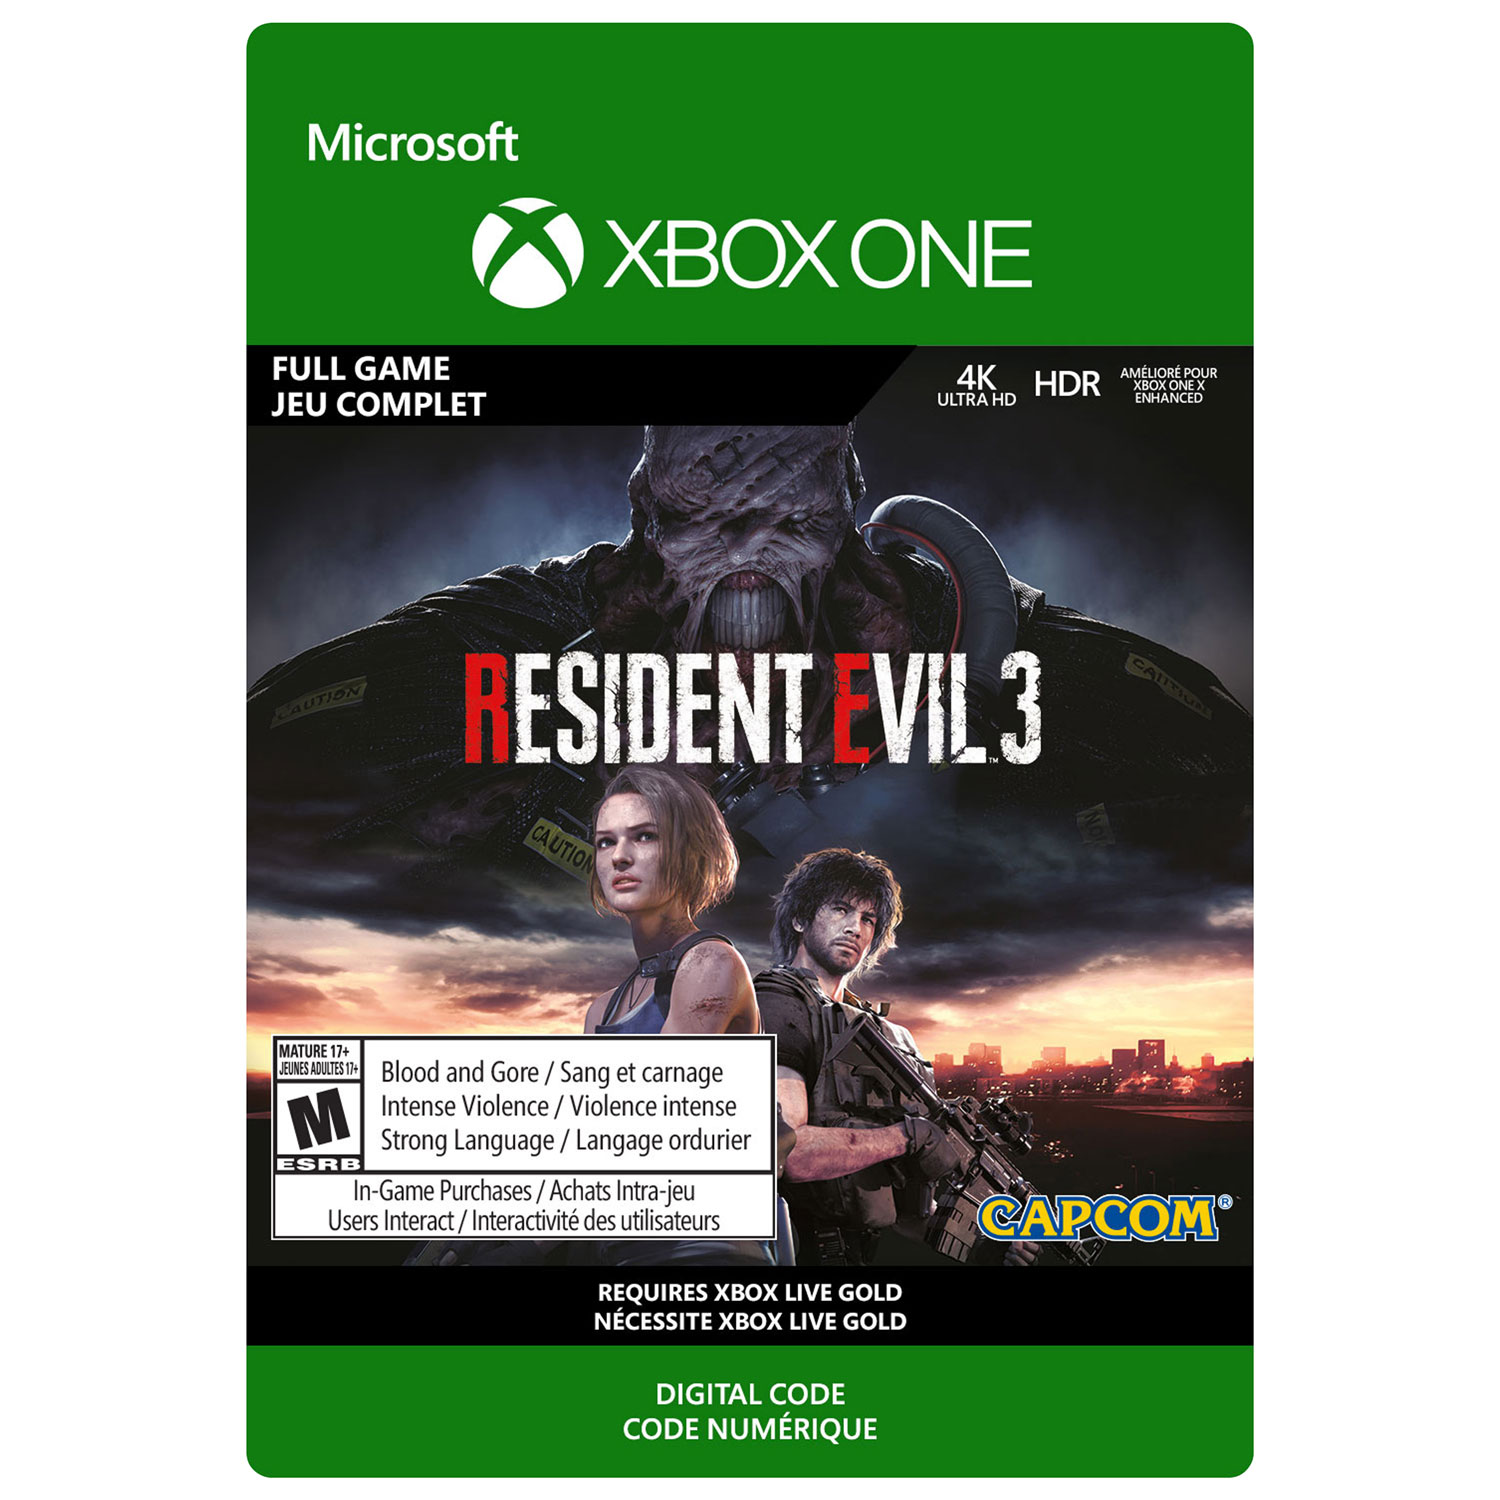 Resident Evil 3 (Xbox One) - Digital Download